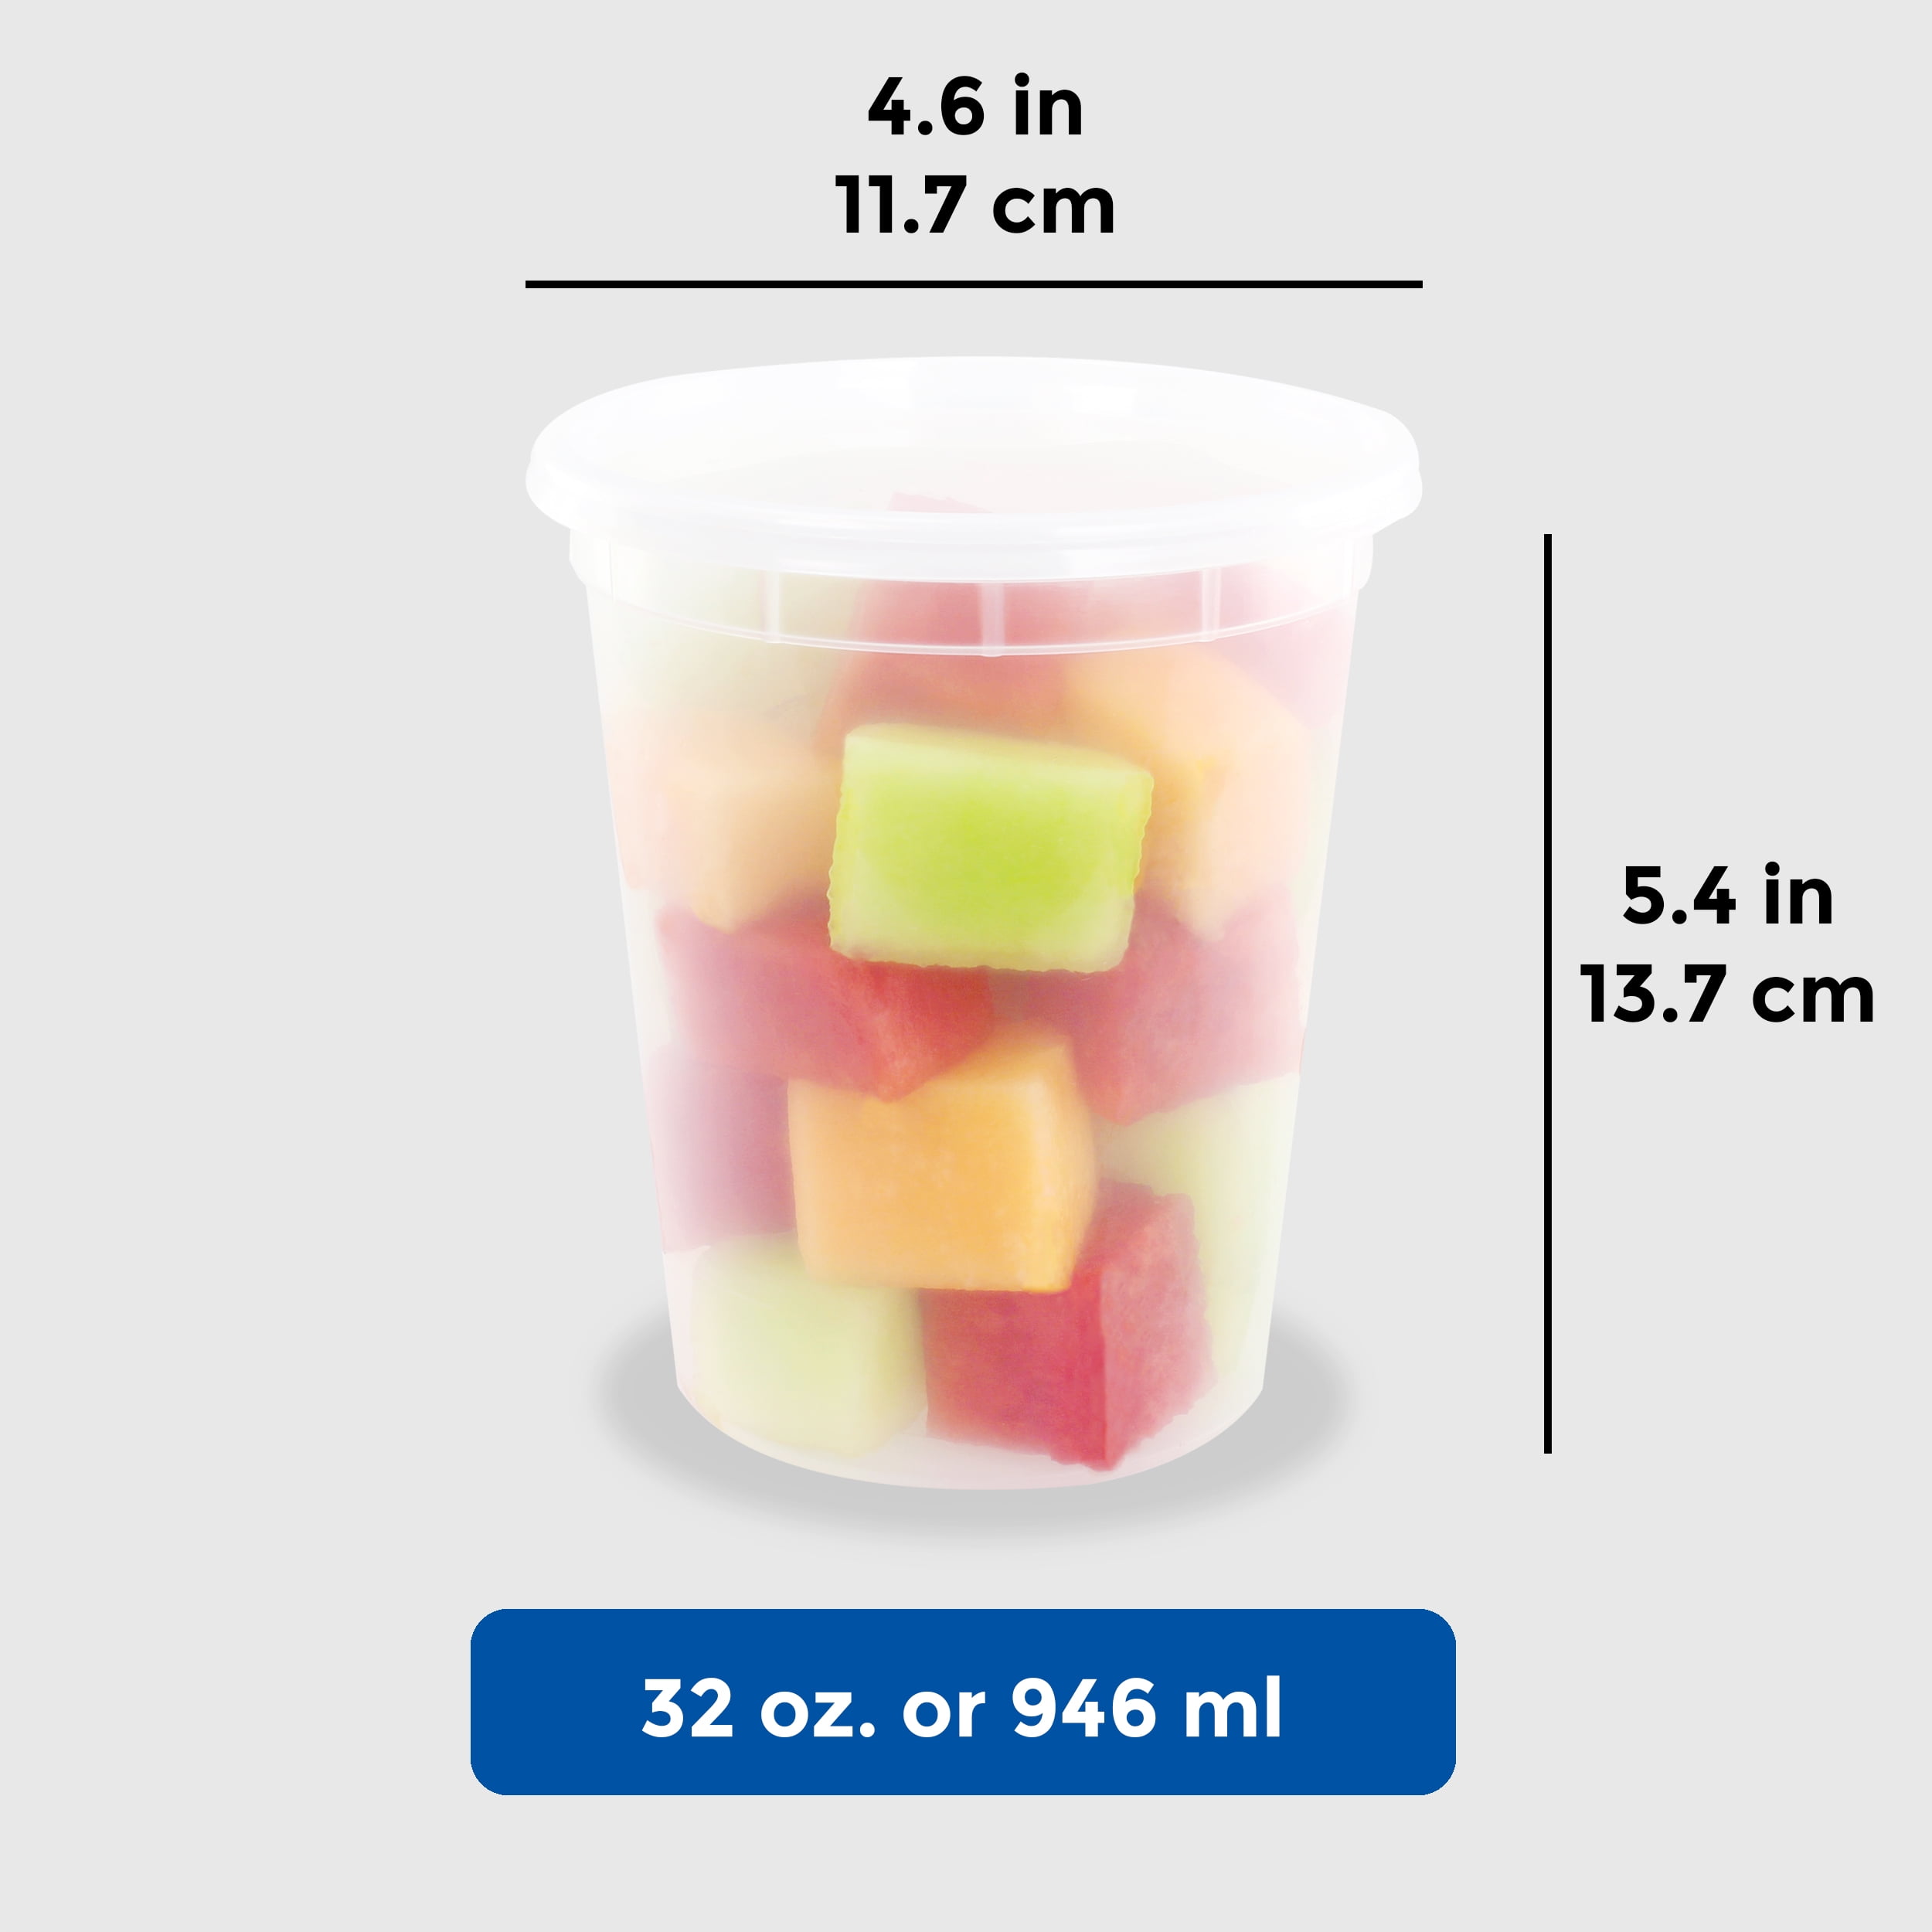 [24 Sets] 64 oz. Plastic Food Storage Deli Containers with Lids, Ice Cream  Bucket & Soup Pail